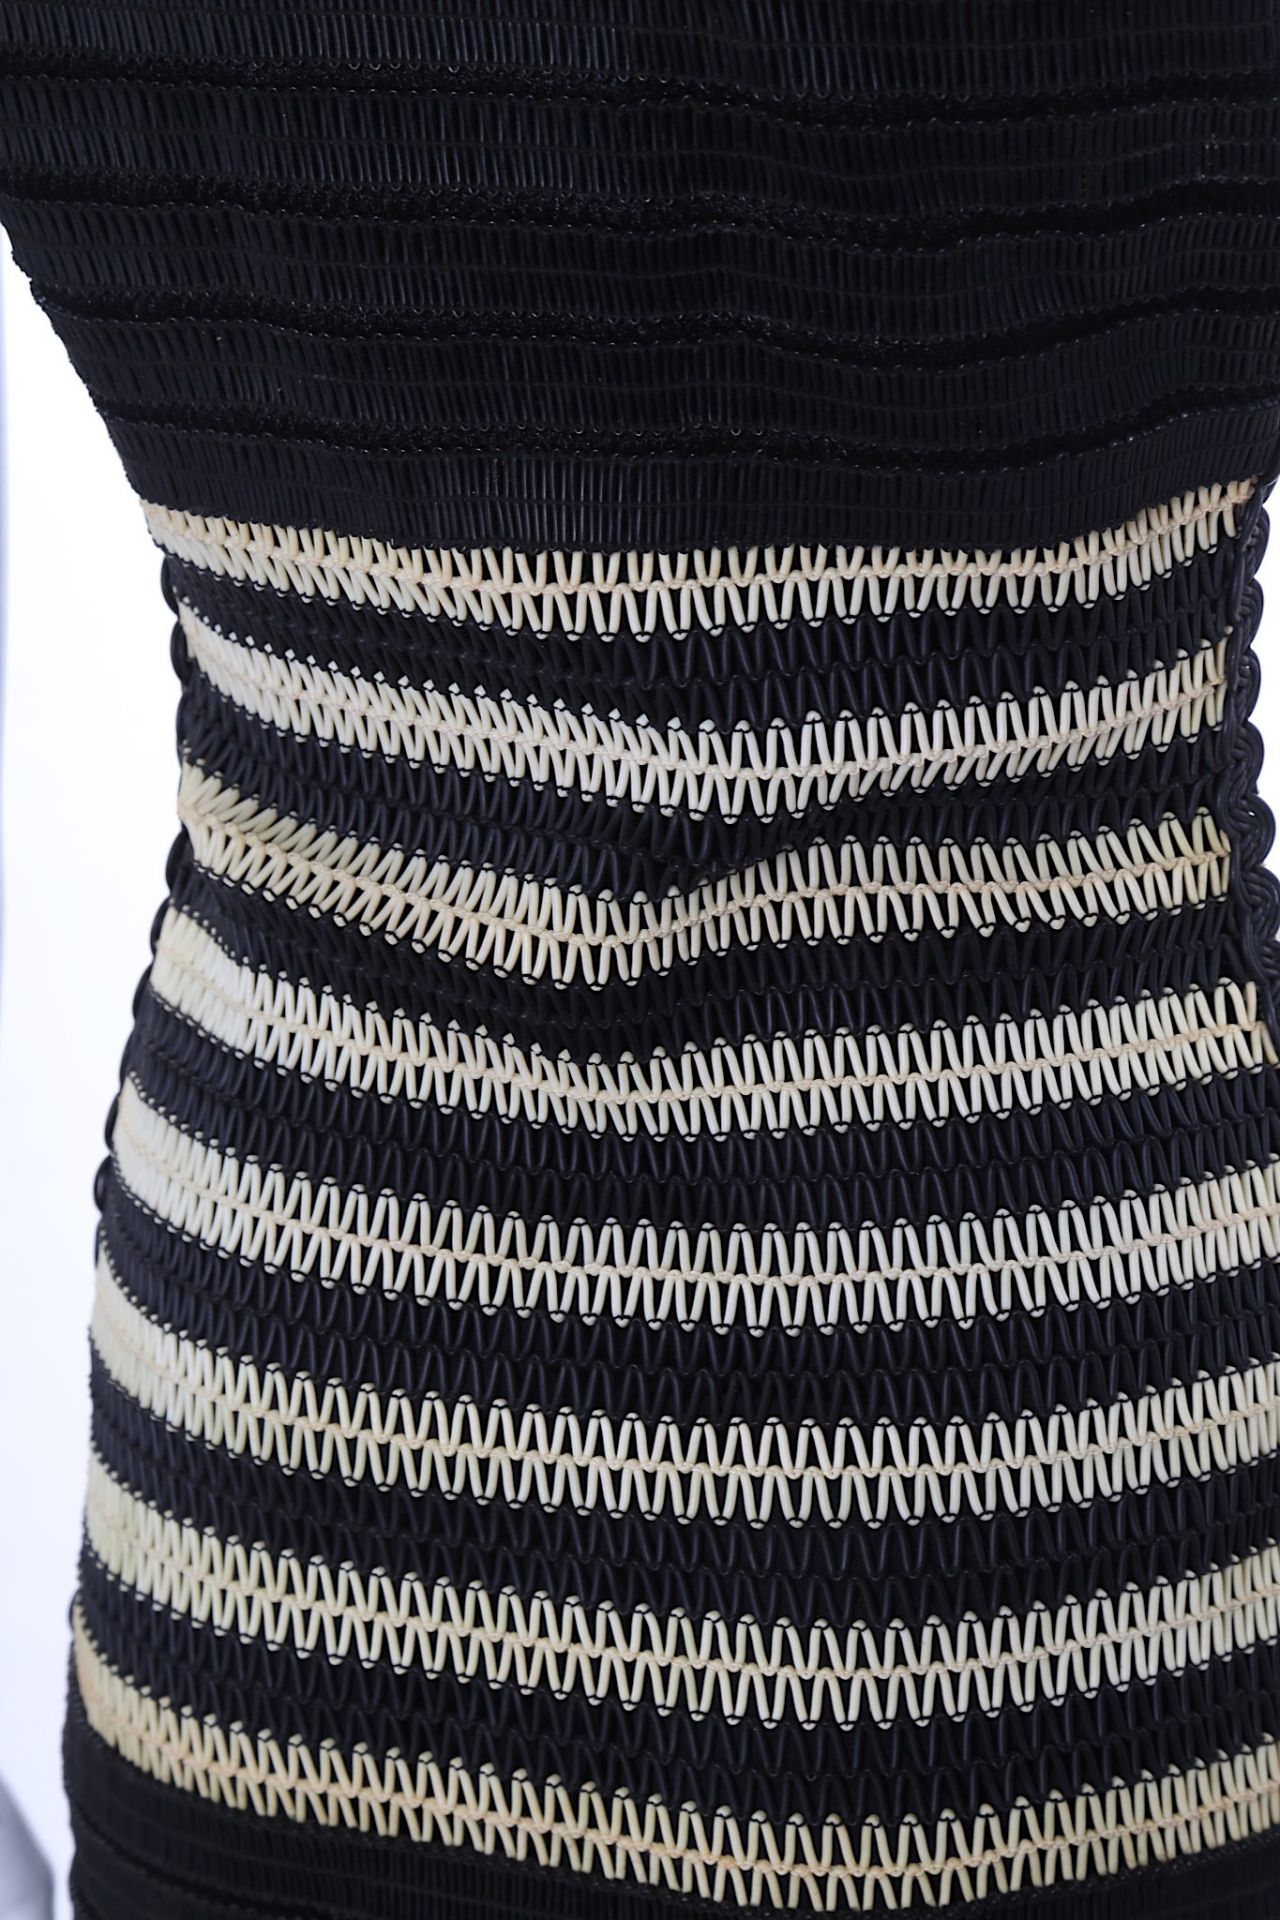 Chanel Boutique Black Rubber Piping Dress, sleeveless design with cream rubber detail, size 38 (UK - Bild 4 aus 6